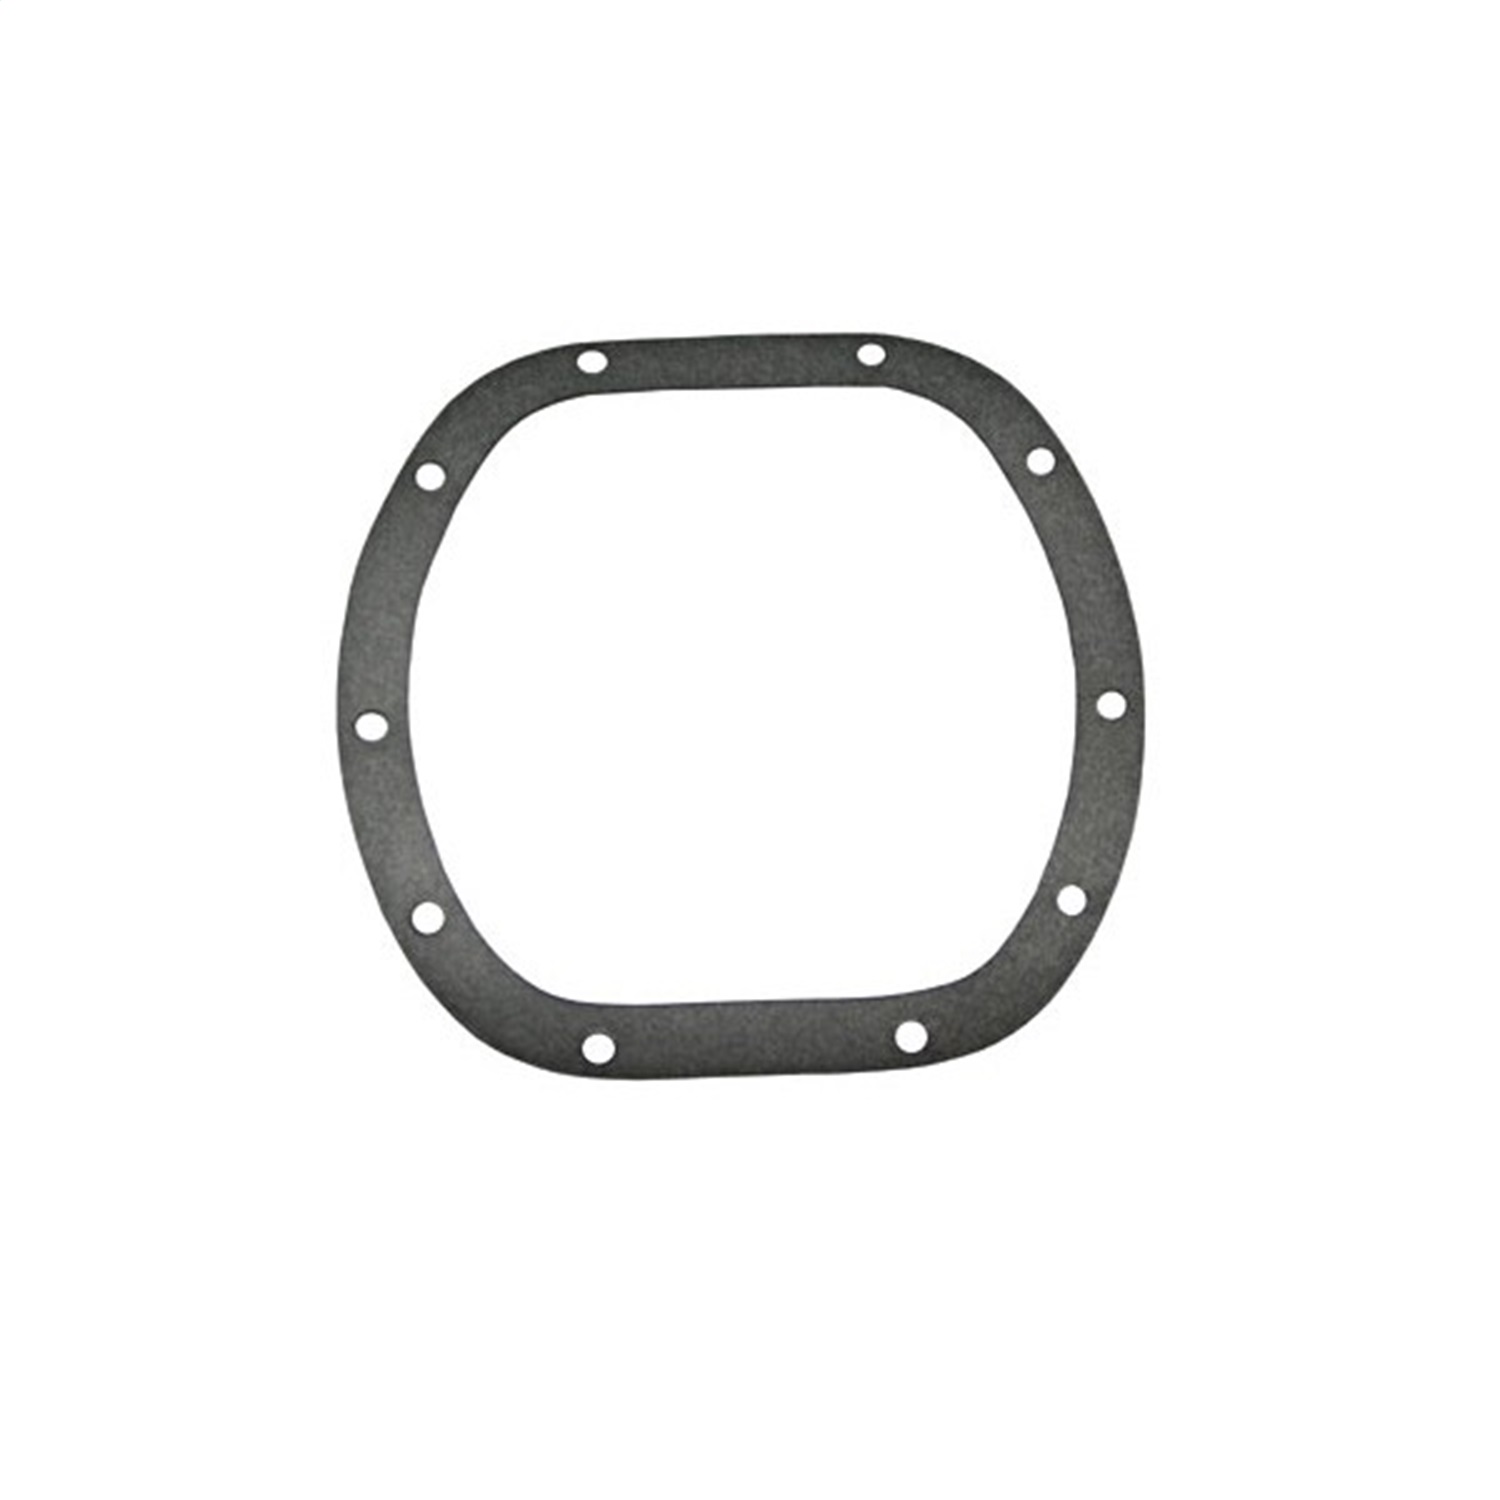 Omix-Ada Omix-Ada 16502.01 Differential Cover Gasket